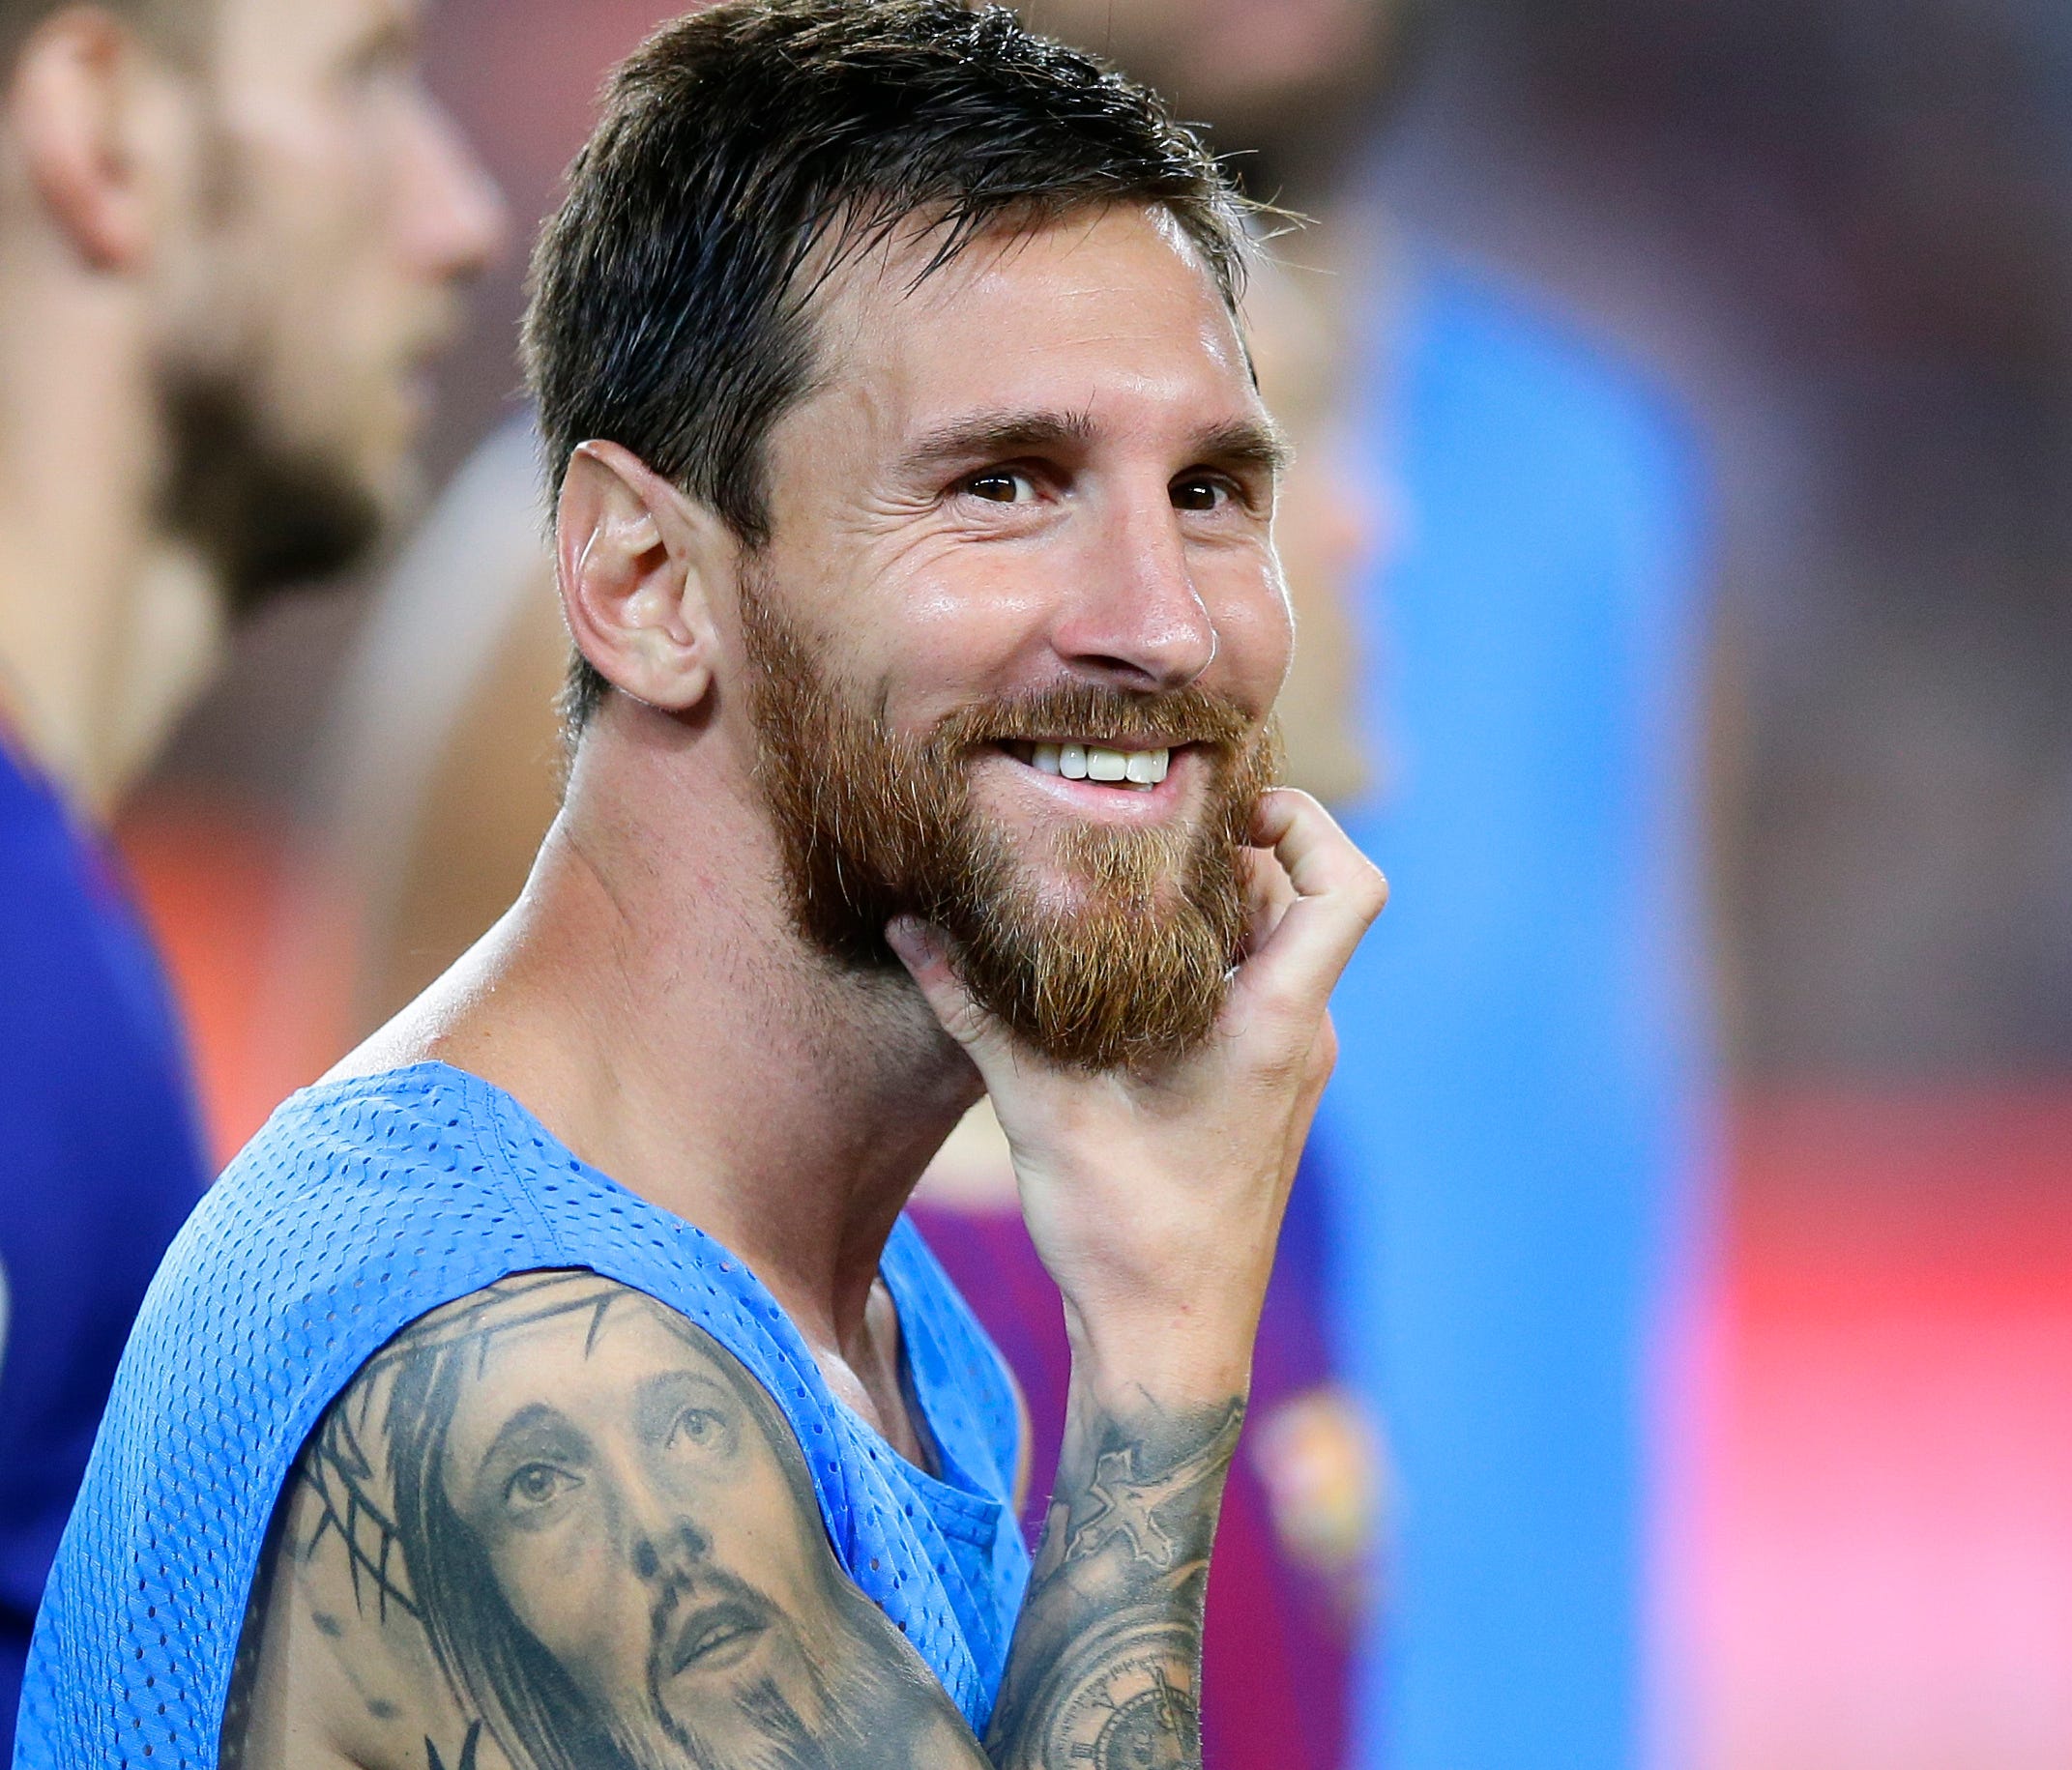 FC Barcelona's Lionel Messi smiles after the Joan Gamper trophy soccer match between FC Barcelona and Chapecoense at the Camp Nou stadium in Barcelona, Spain, Monday, Aug. 7, 2017.